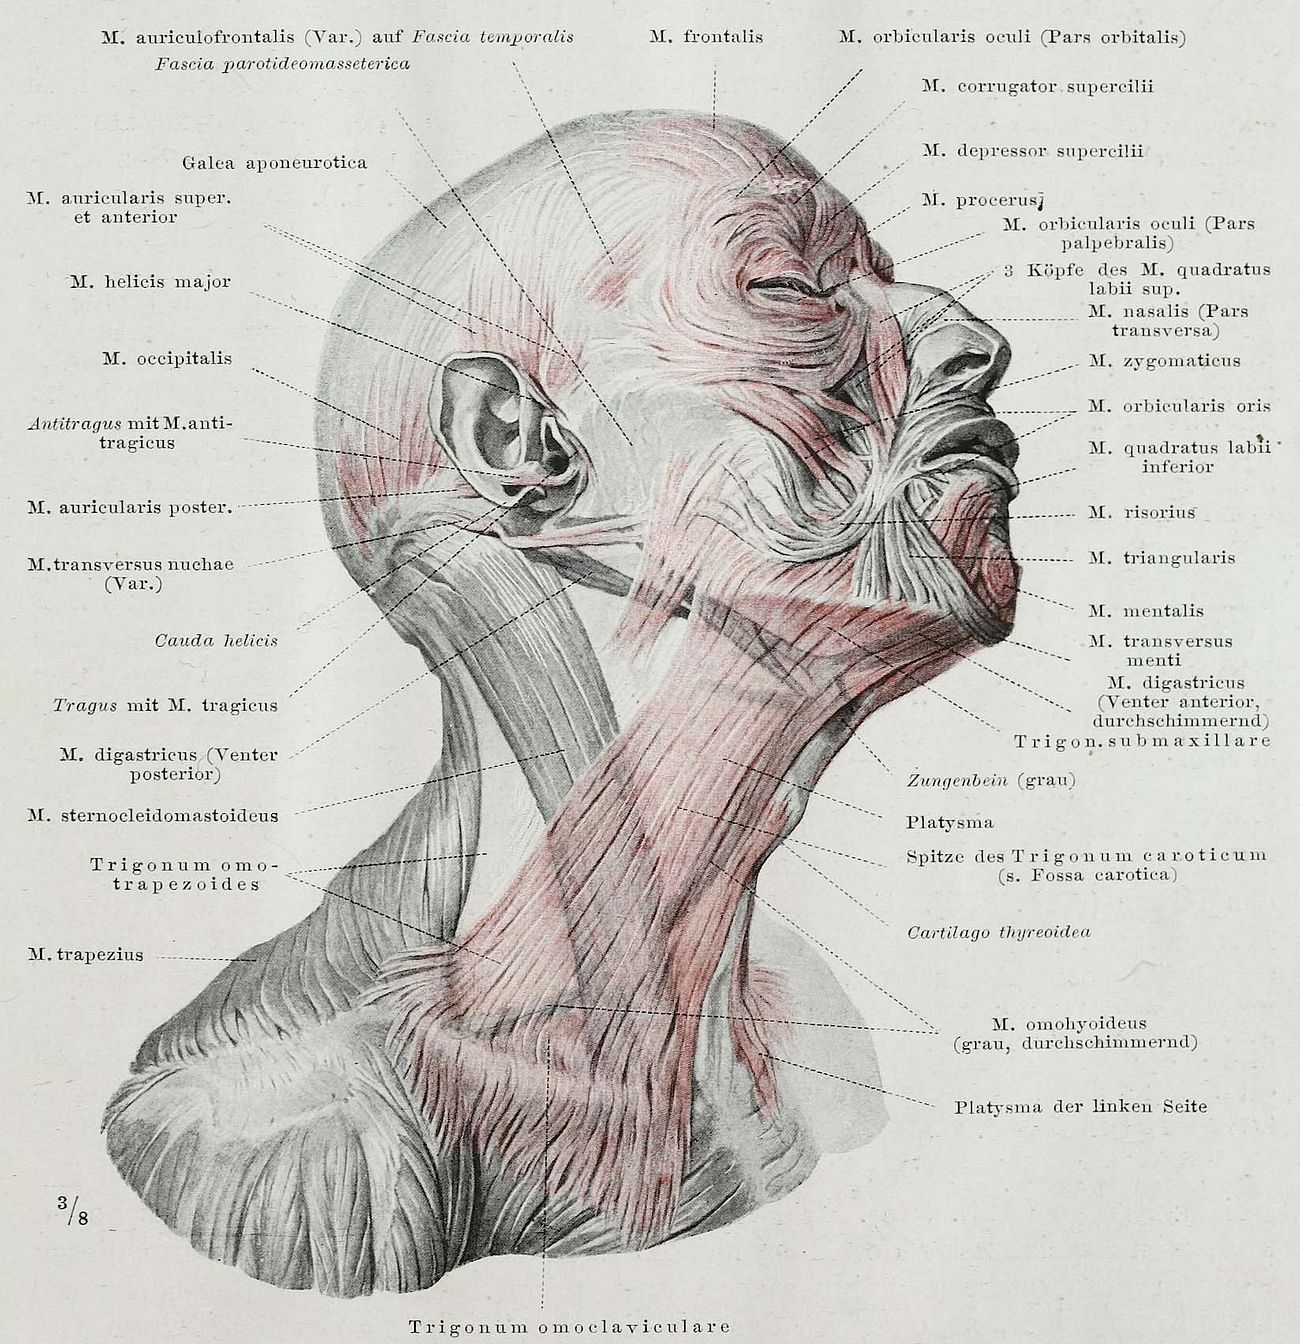 An anatomical illustration from the 1921